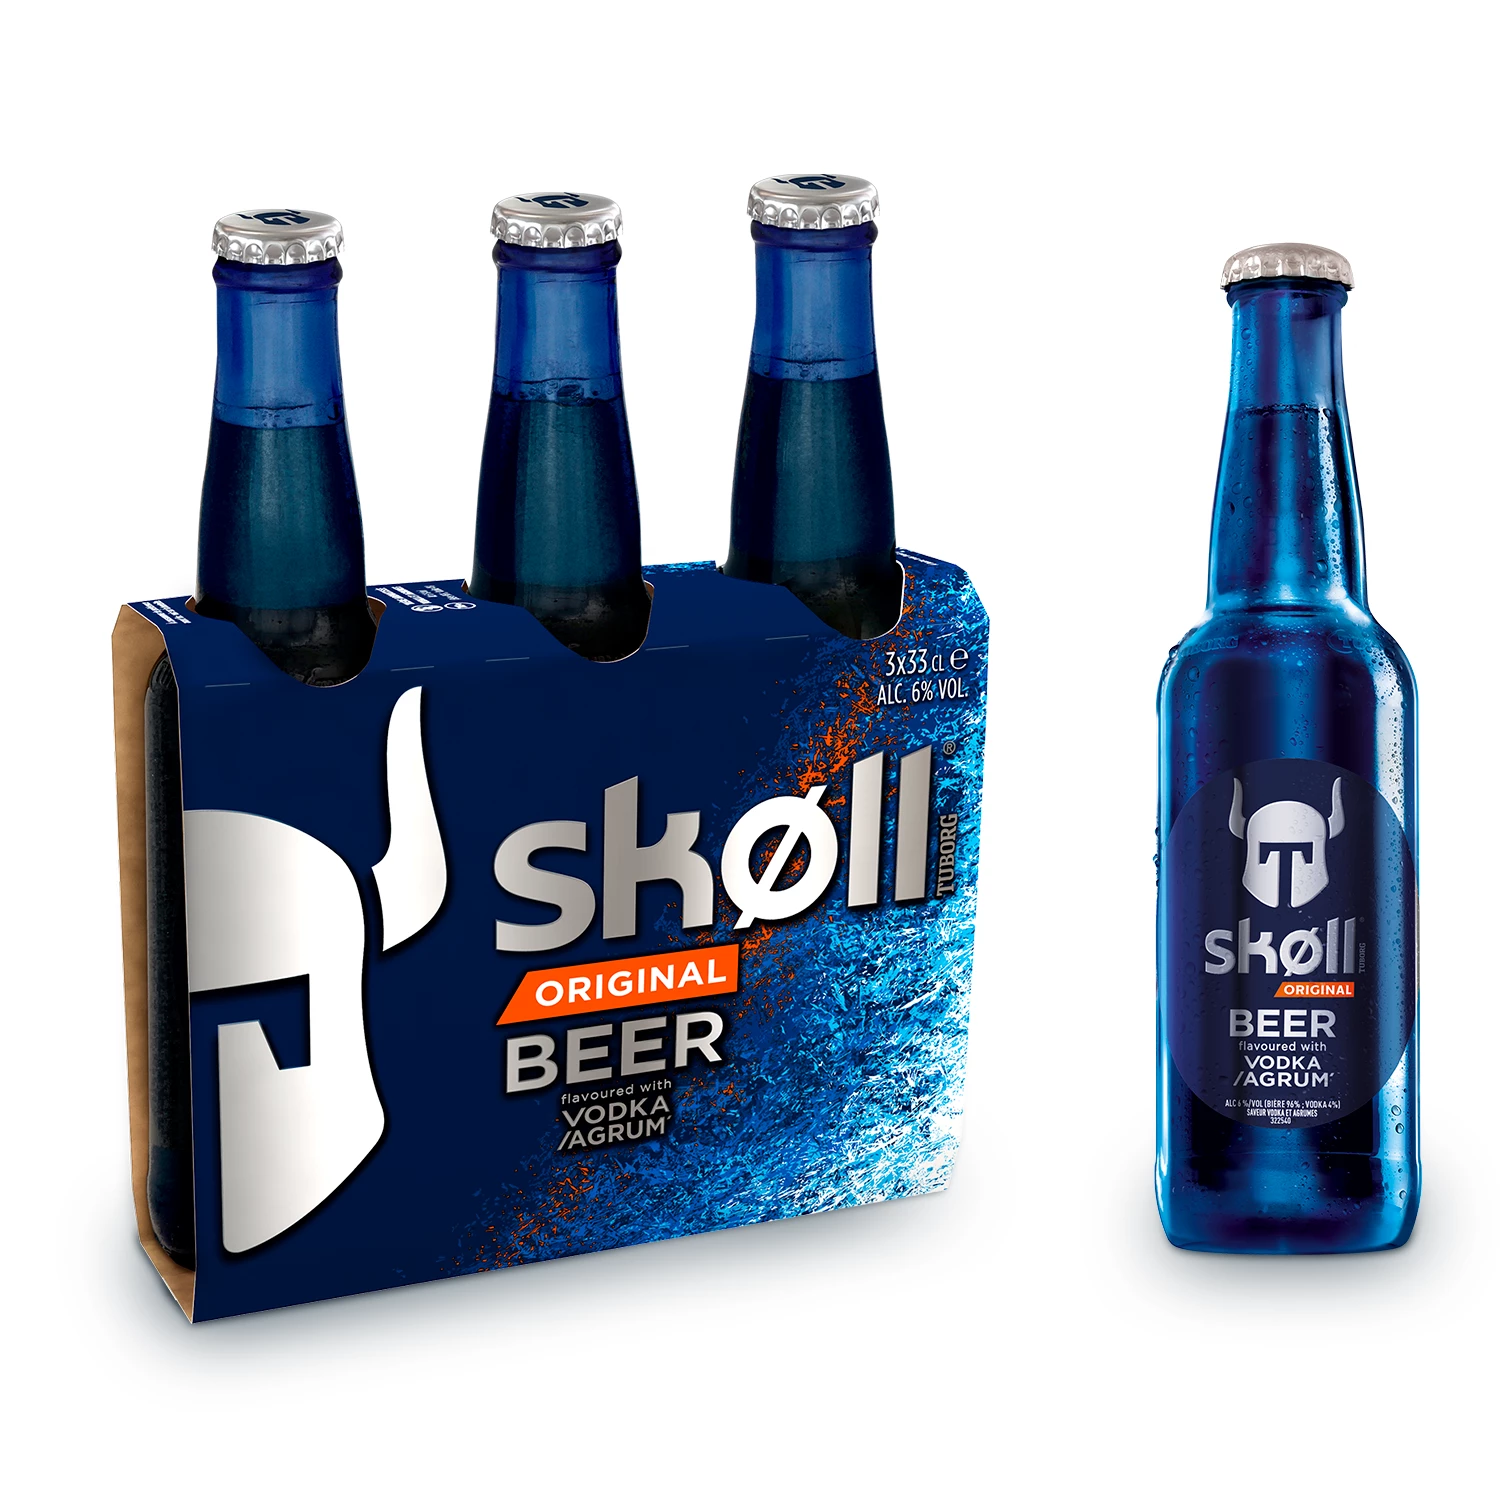 Vodka and Citrus flavored beer, 6°, 3x33cl - SKOLL